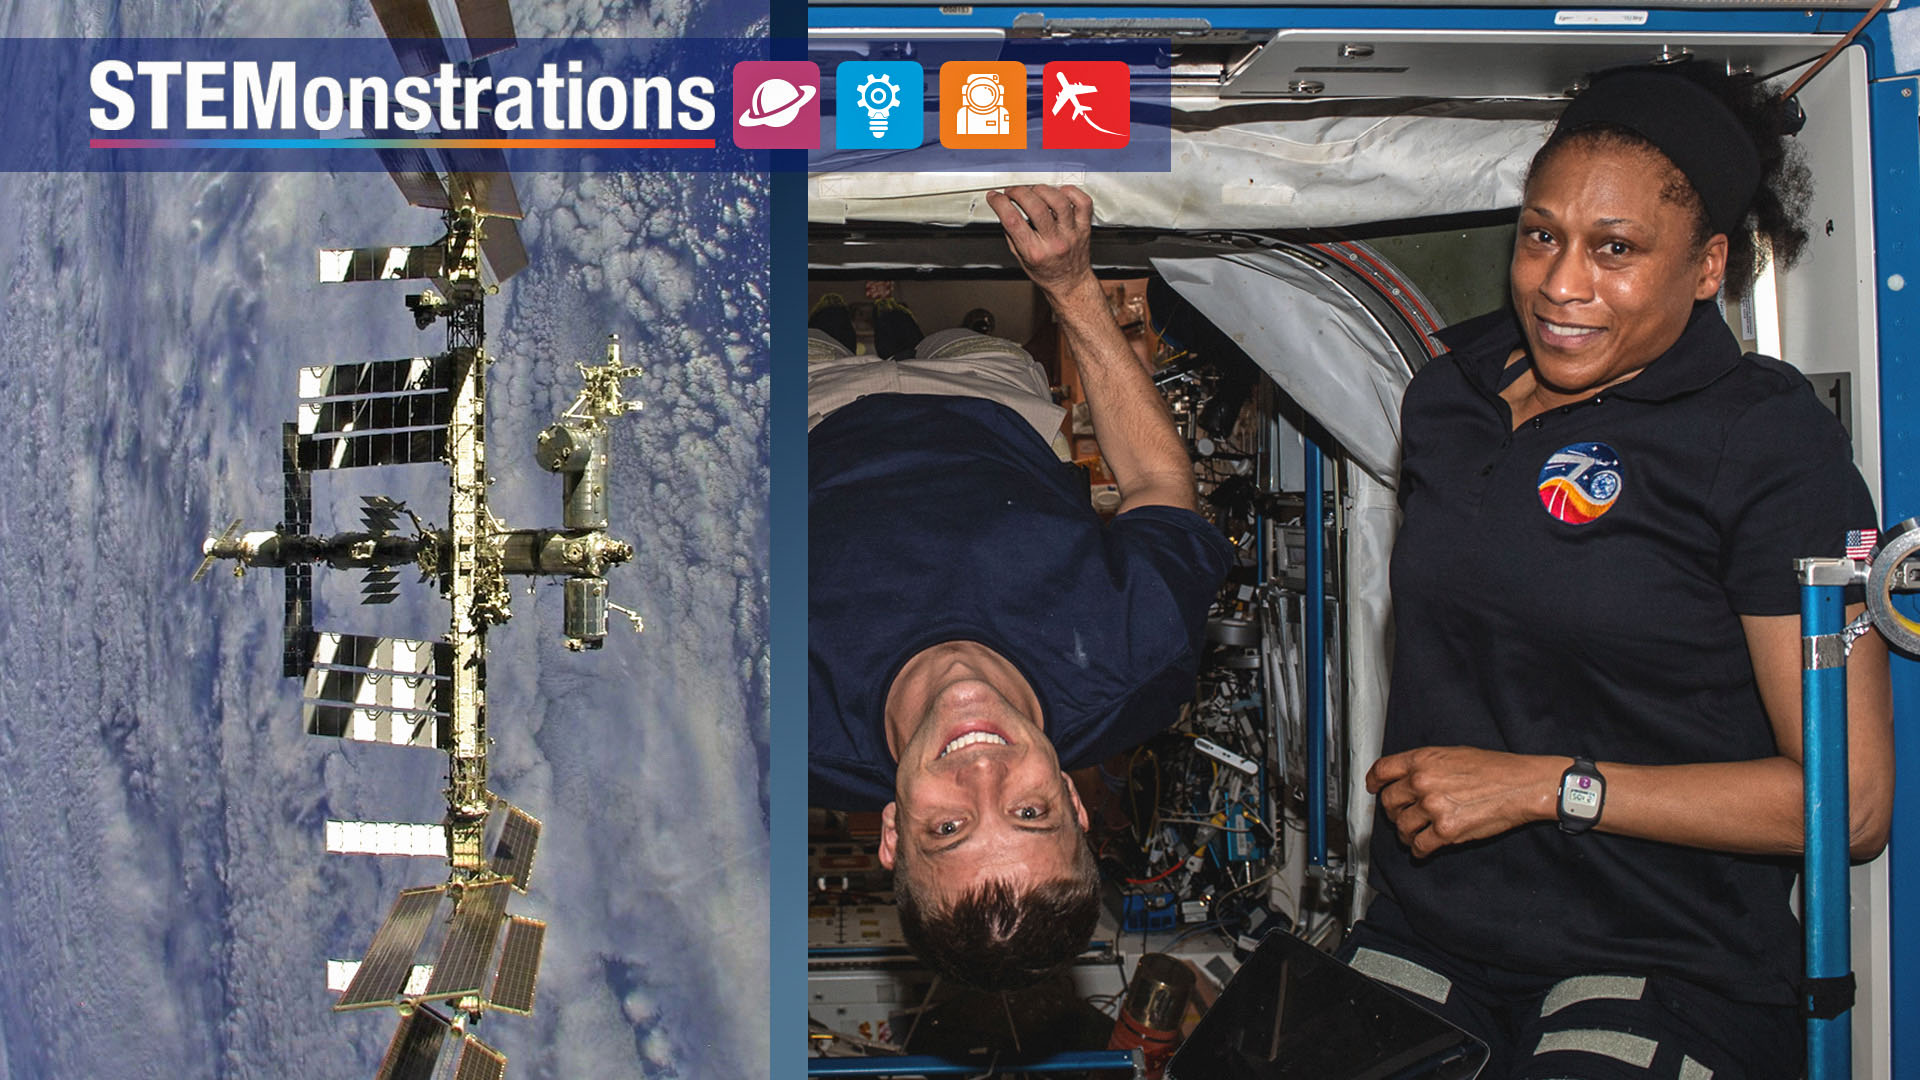 The left side of this image shows the space station above a cloud-covered Earth. The right side shows Dominick, wearing a blue t-shirt and khaki pants, hanging upside-down from a hatch, and Epps, wearing a black polo with an Expedition 70 patch, facing the camera. The STEMonstrations logo is on the left top of the image.